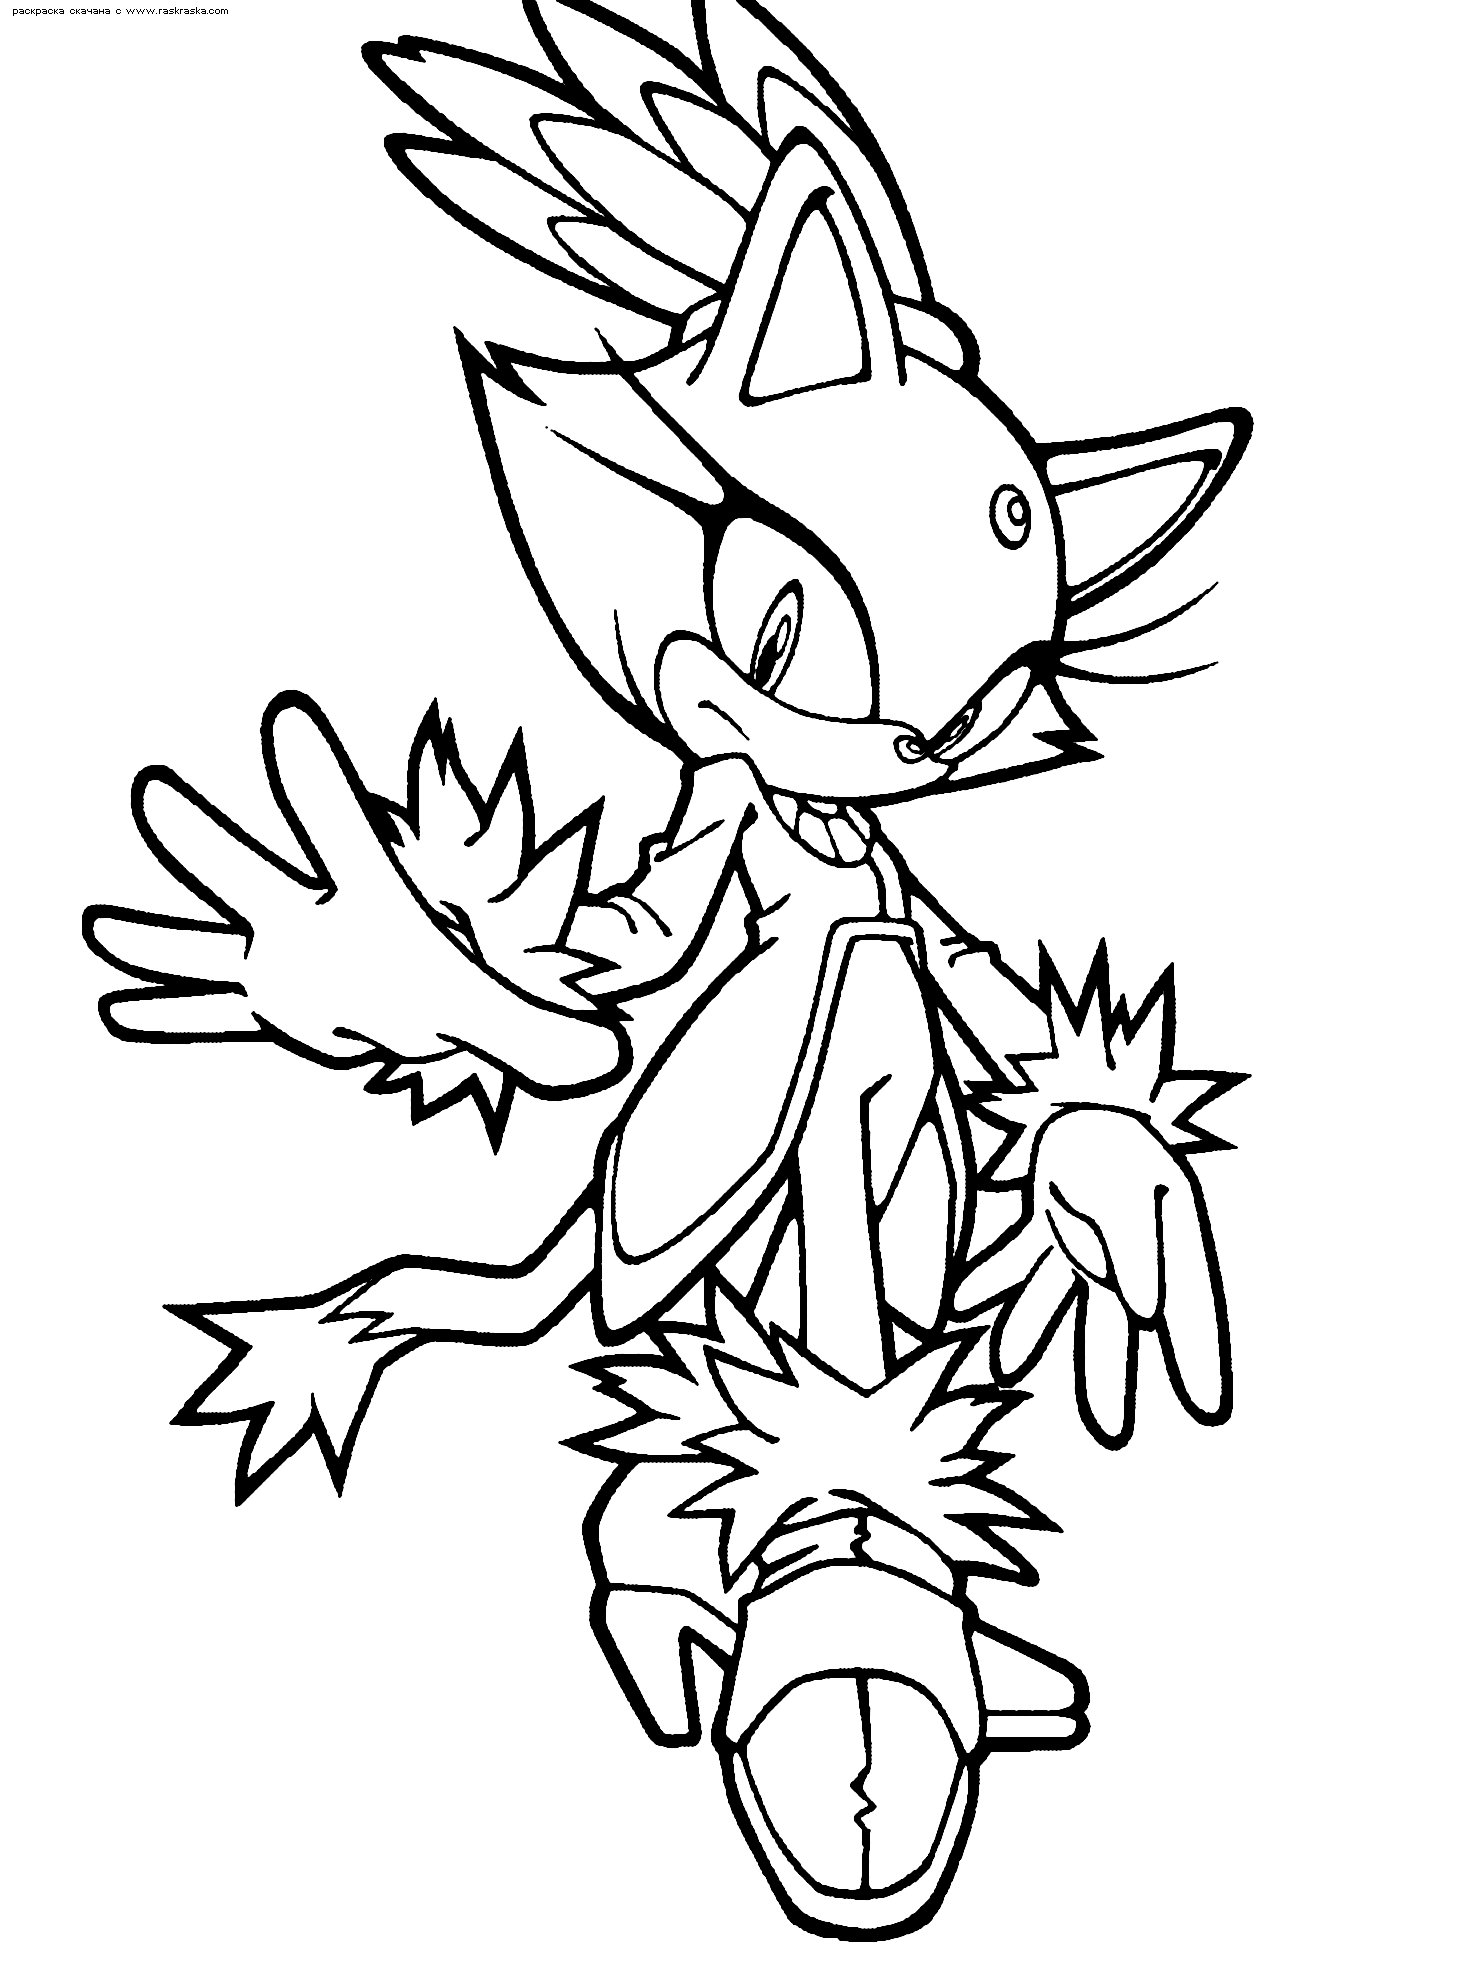 Sonic Coloring Pages - Coloring Kids